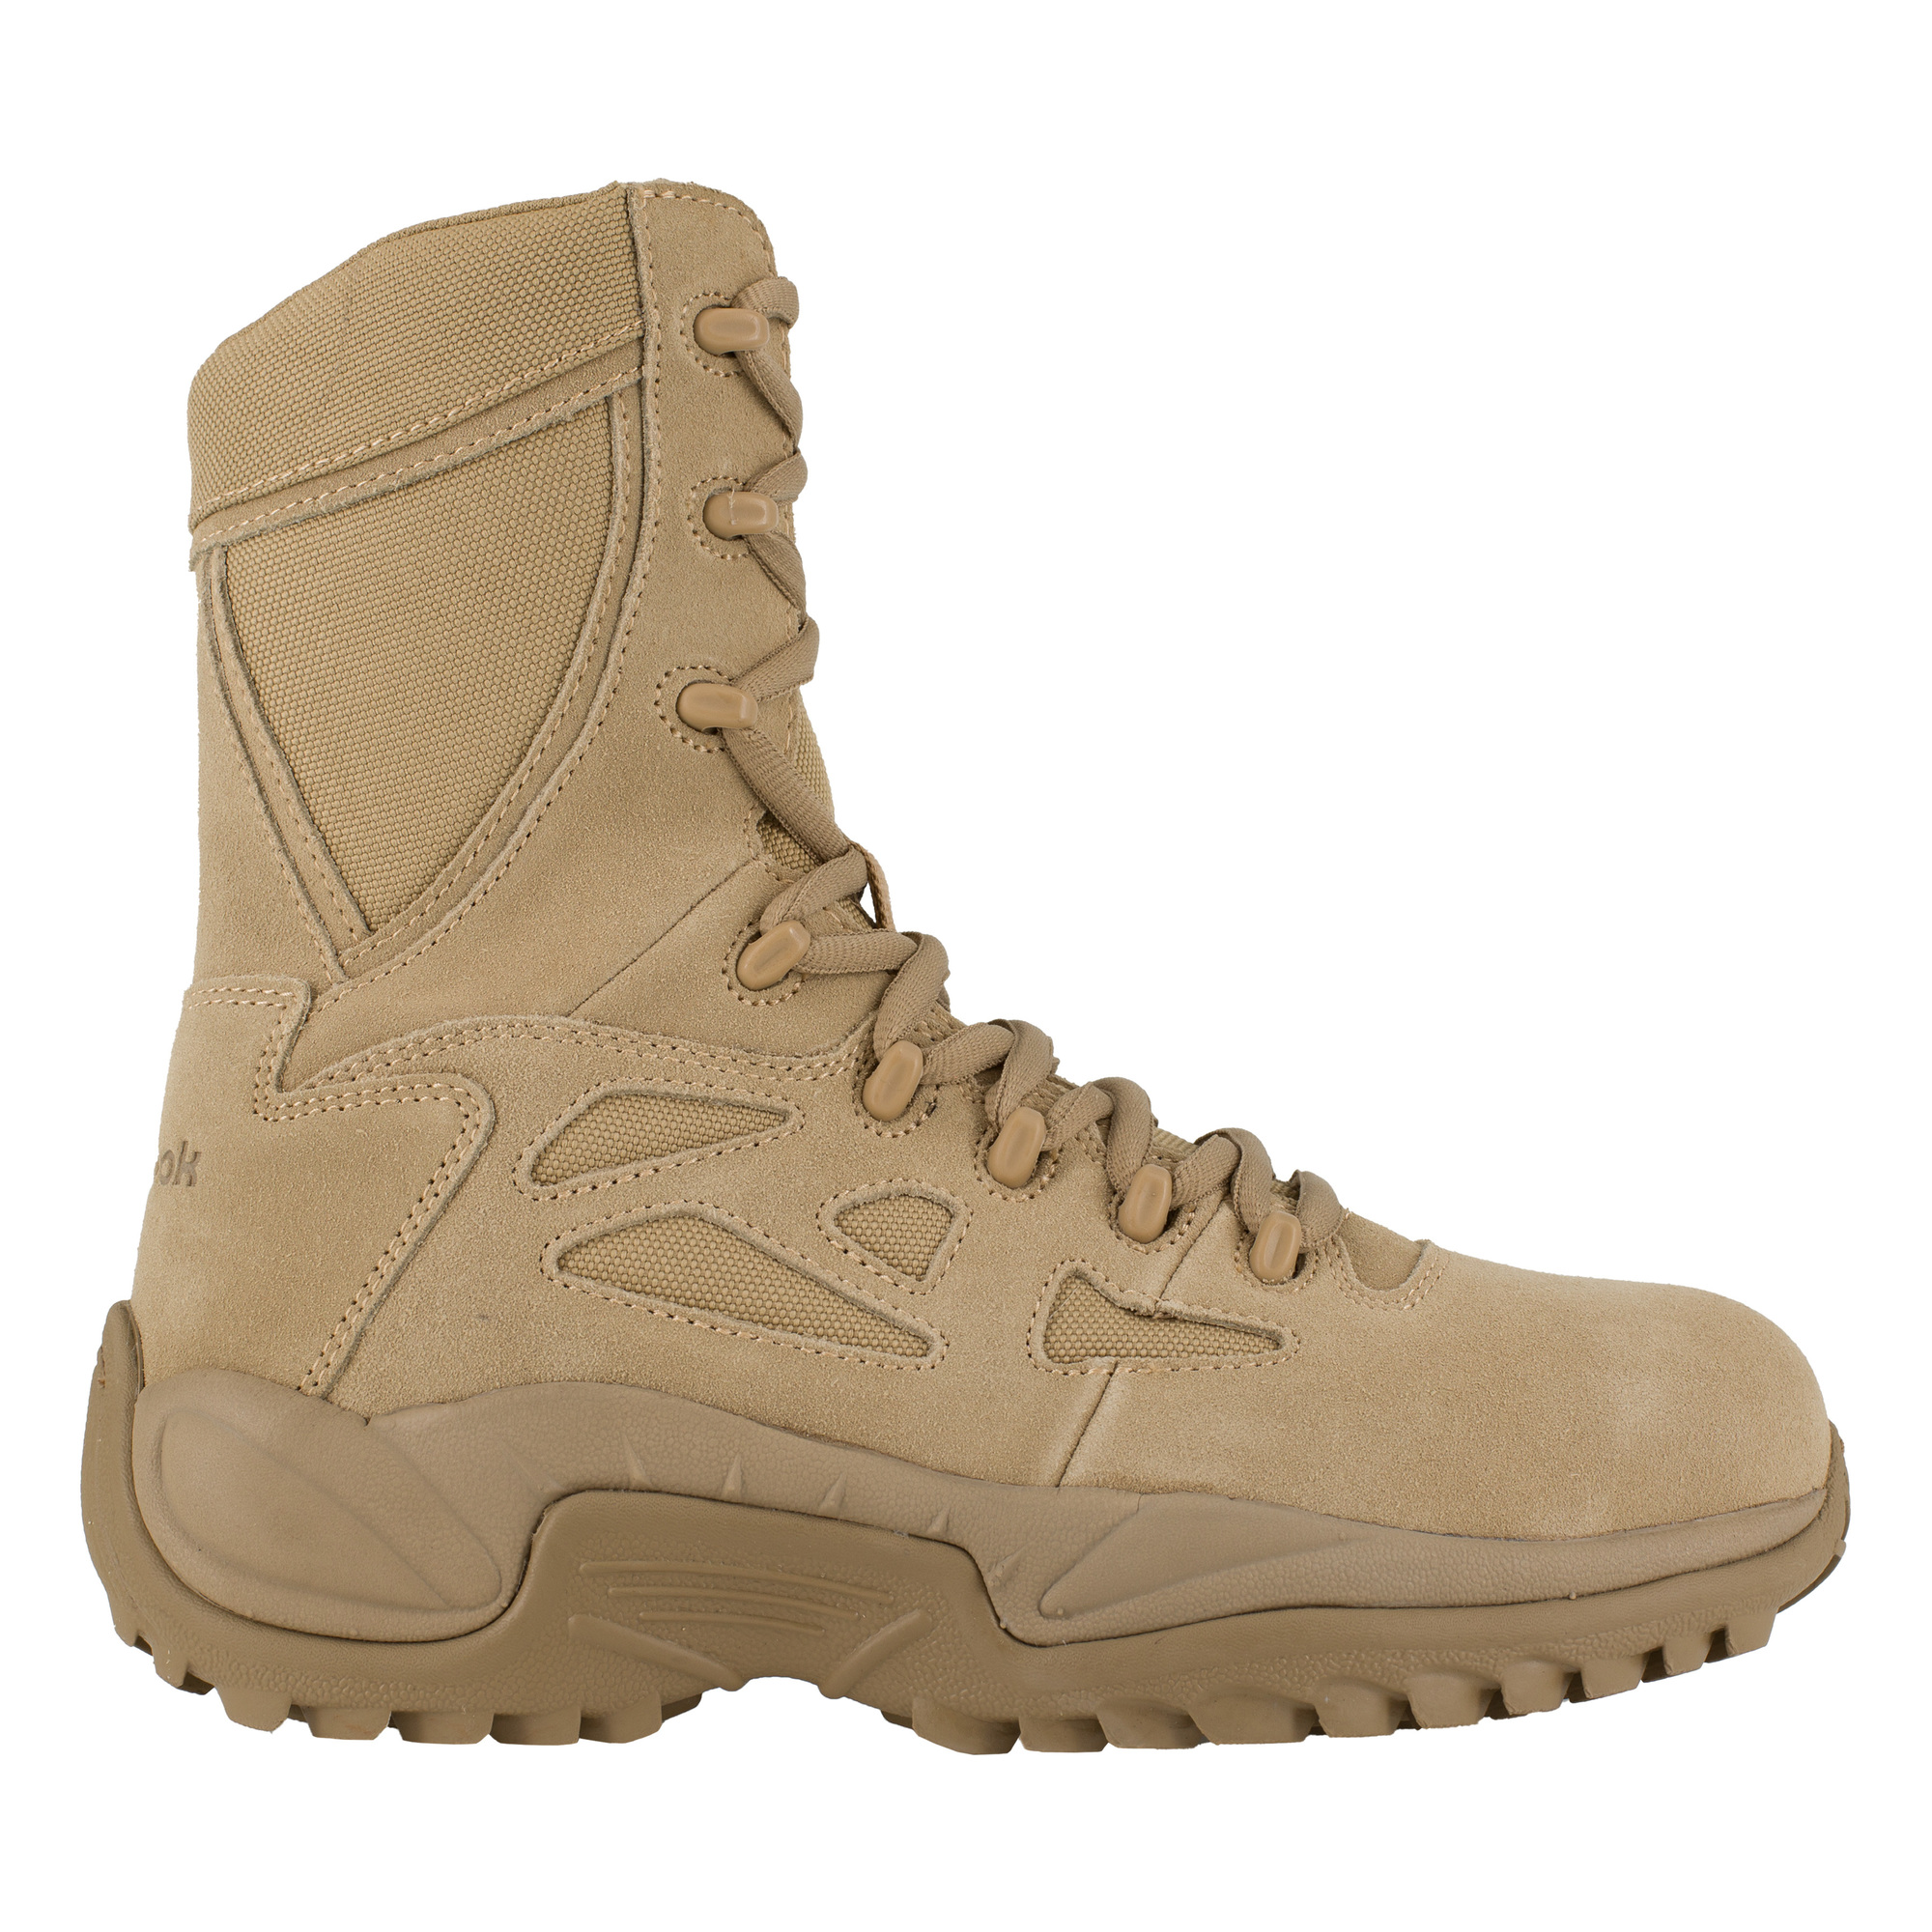 Reebok, 8Inch Stealth Tactical Boot with Side Zipper, Size 10, Width Medium, Color Desert Tan, Model RB894